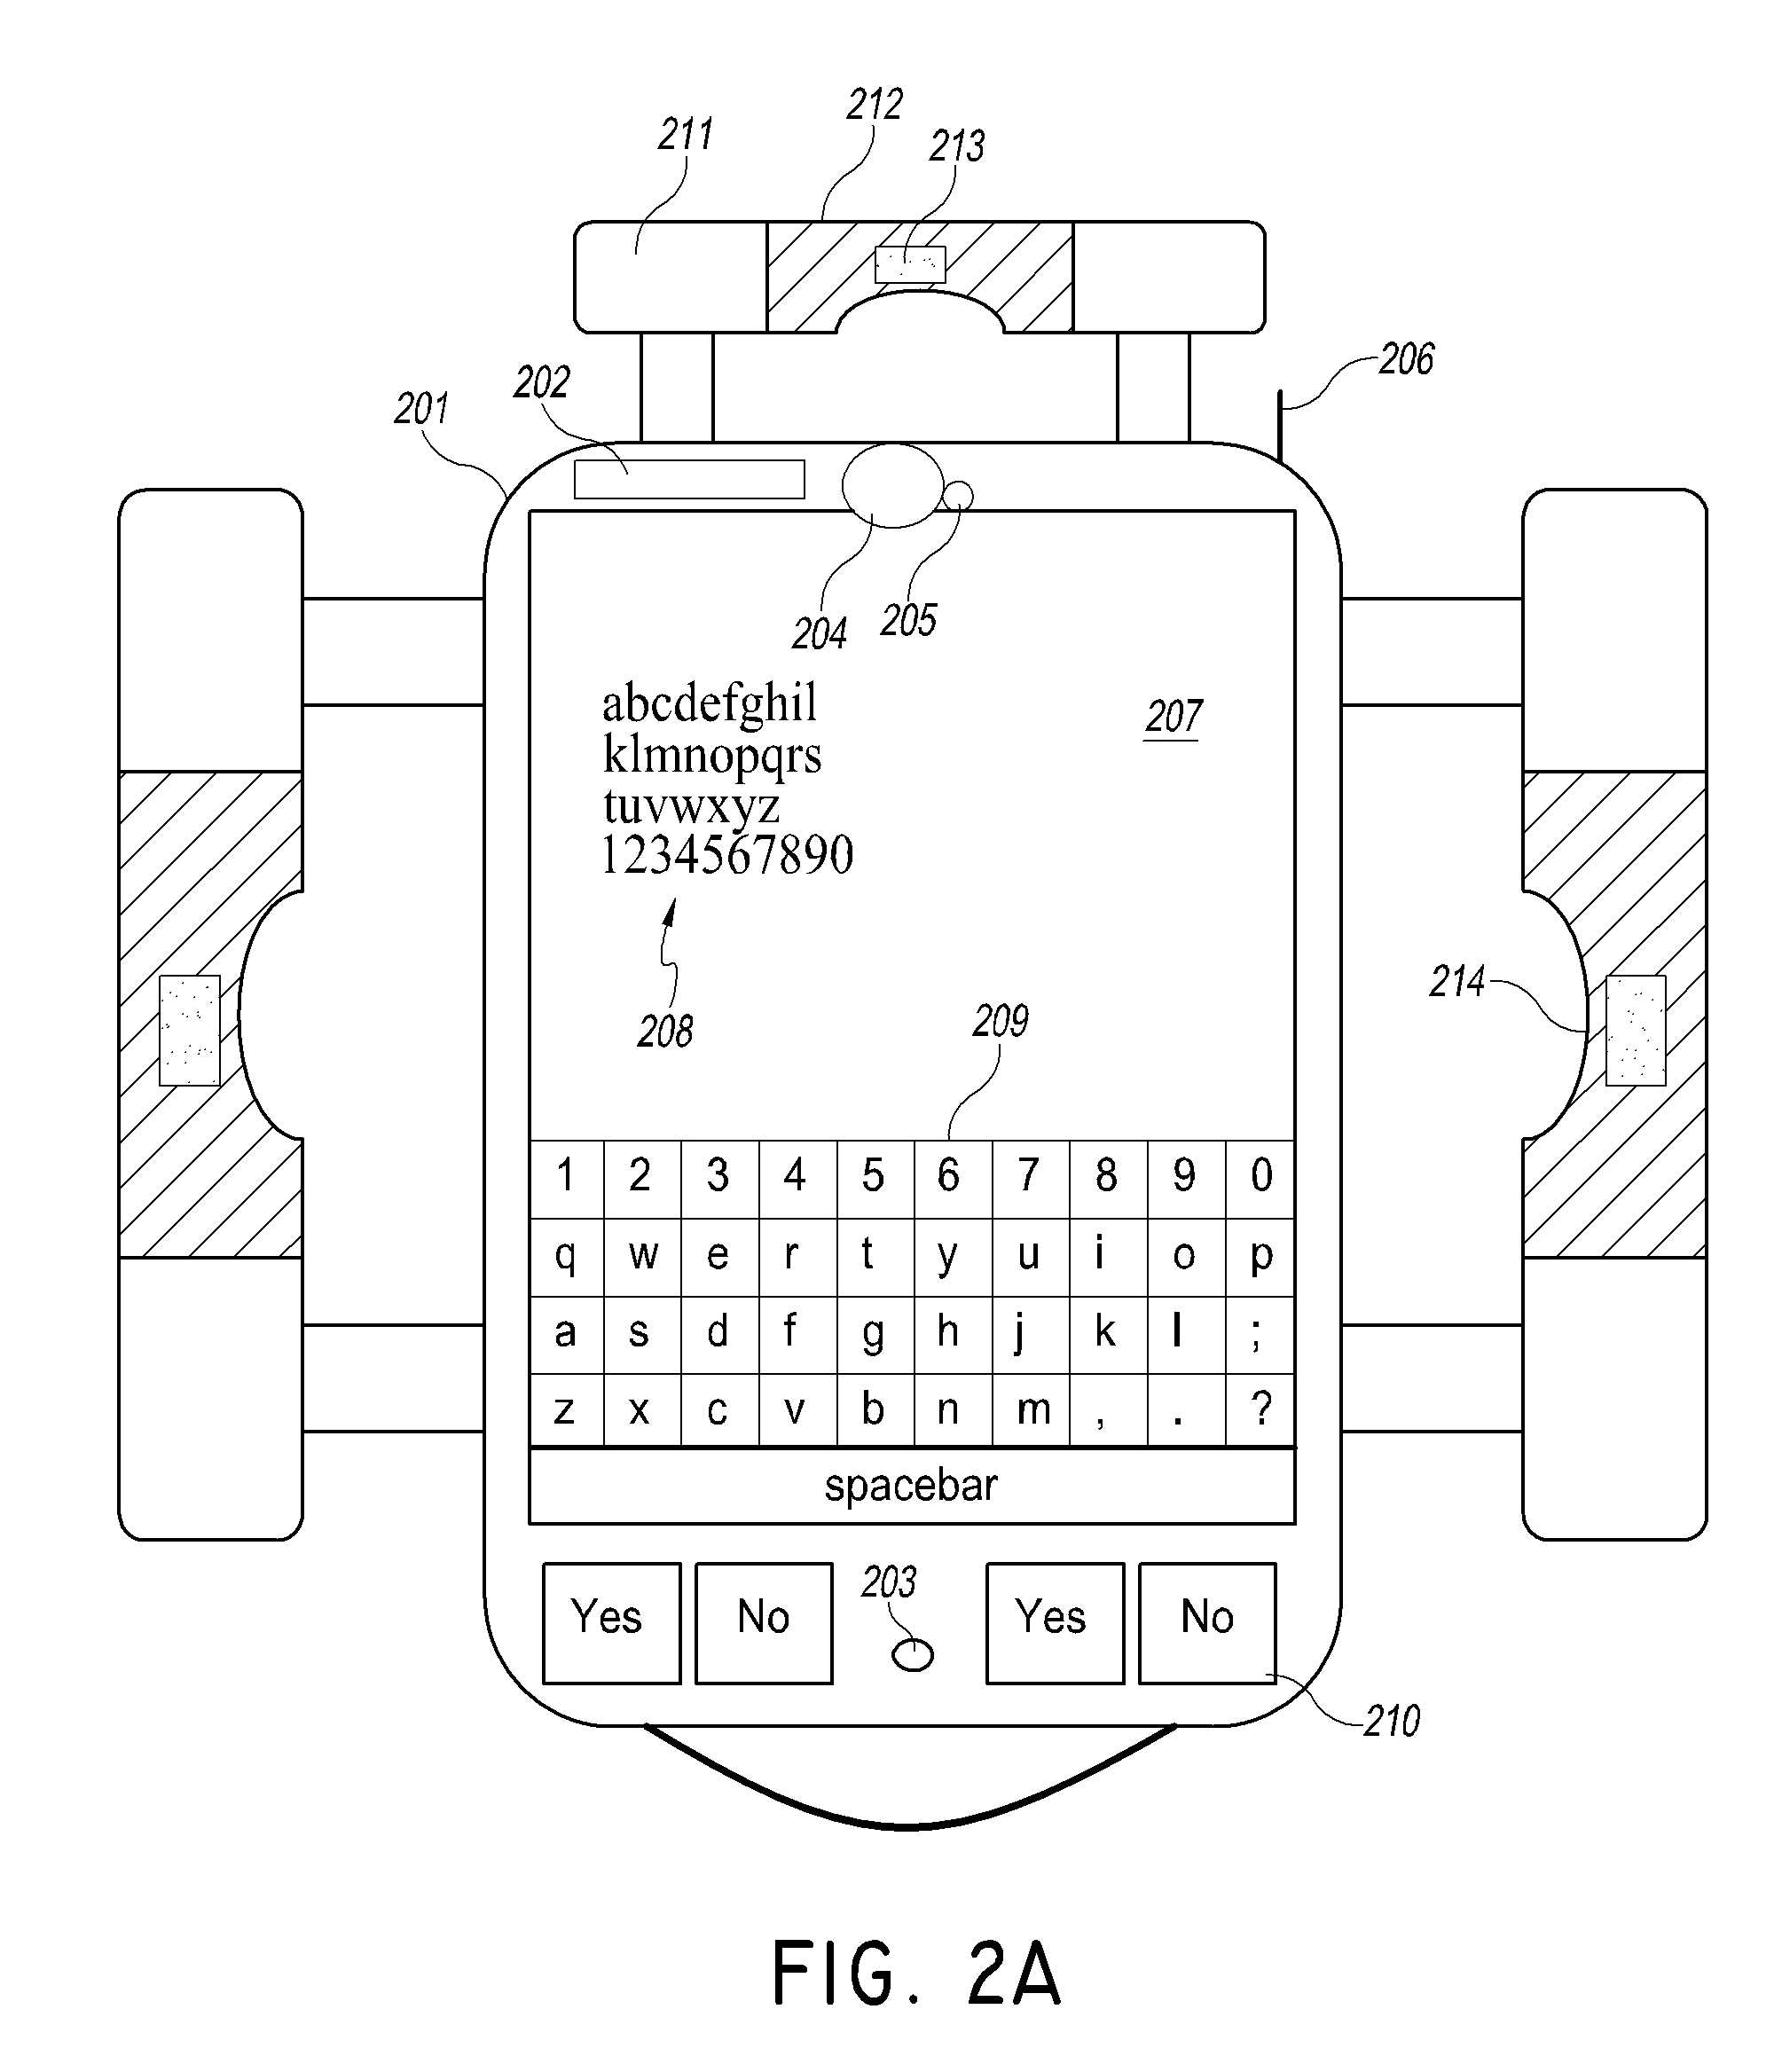 Device and methods for mobile monitoring and assessment of clinical function through sensors and interactive patient responses